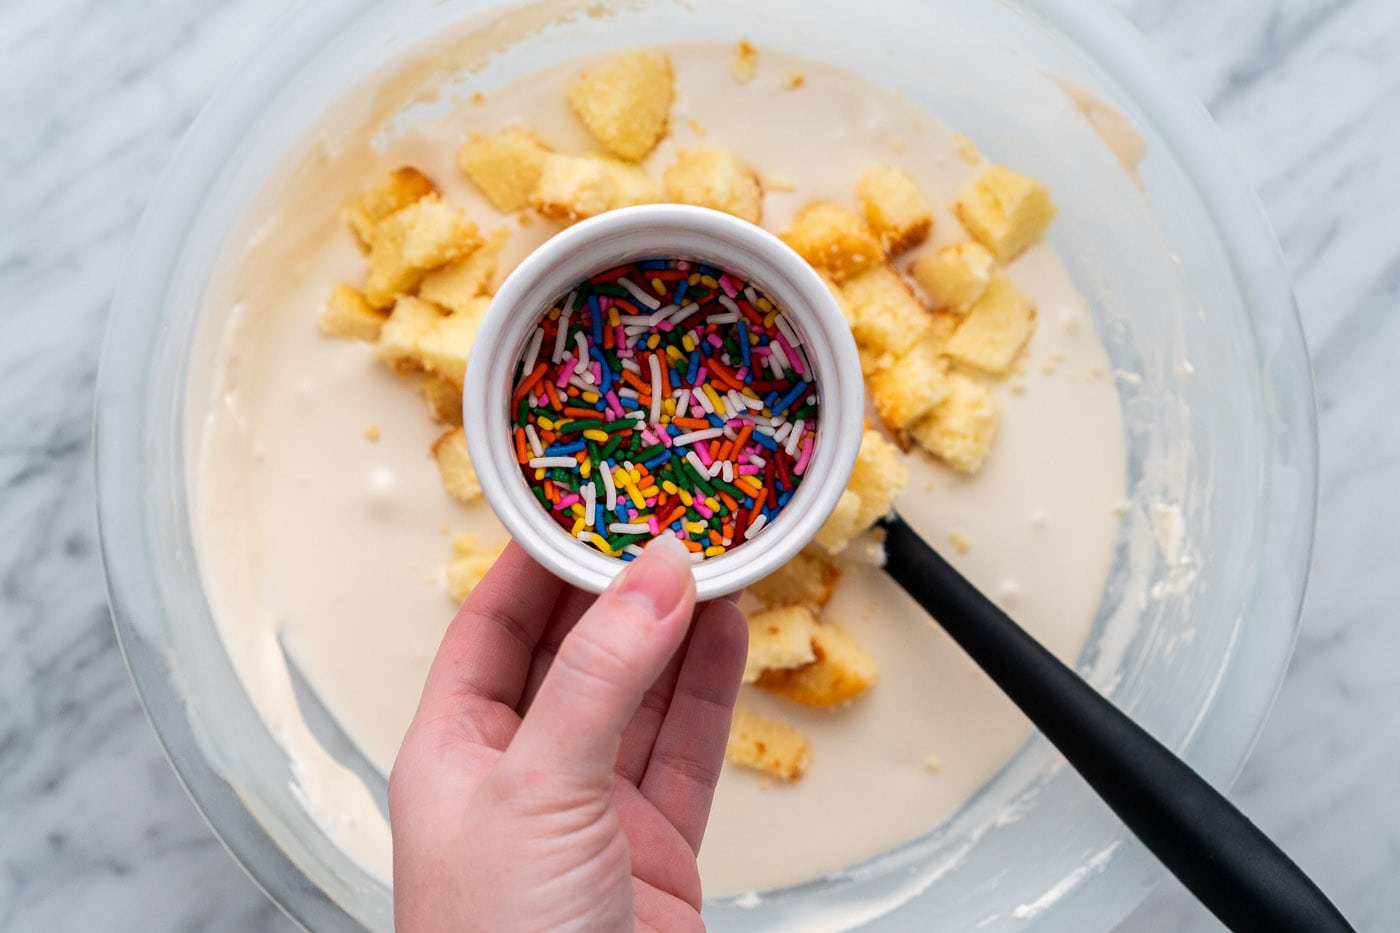 sprinkles and cake pieces added to no churn ice cream